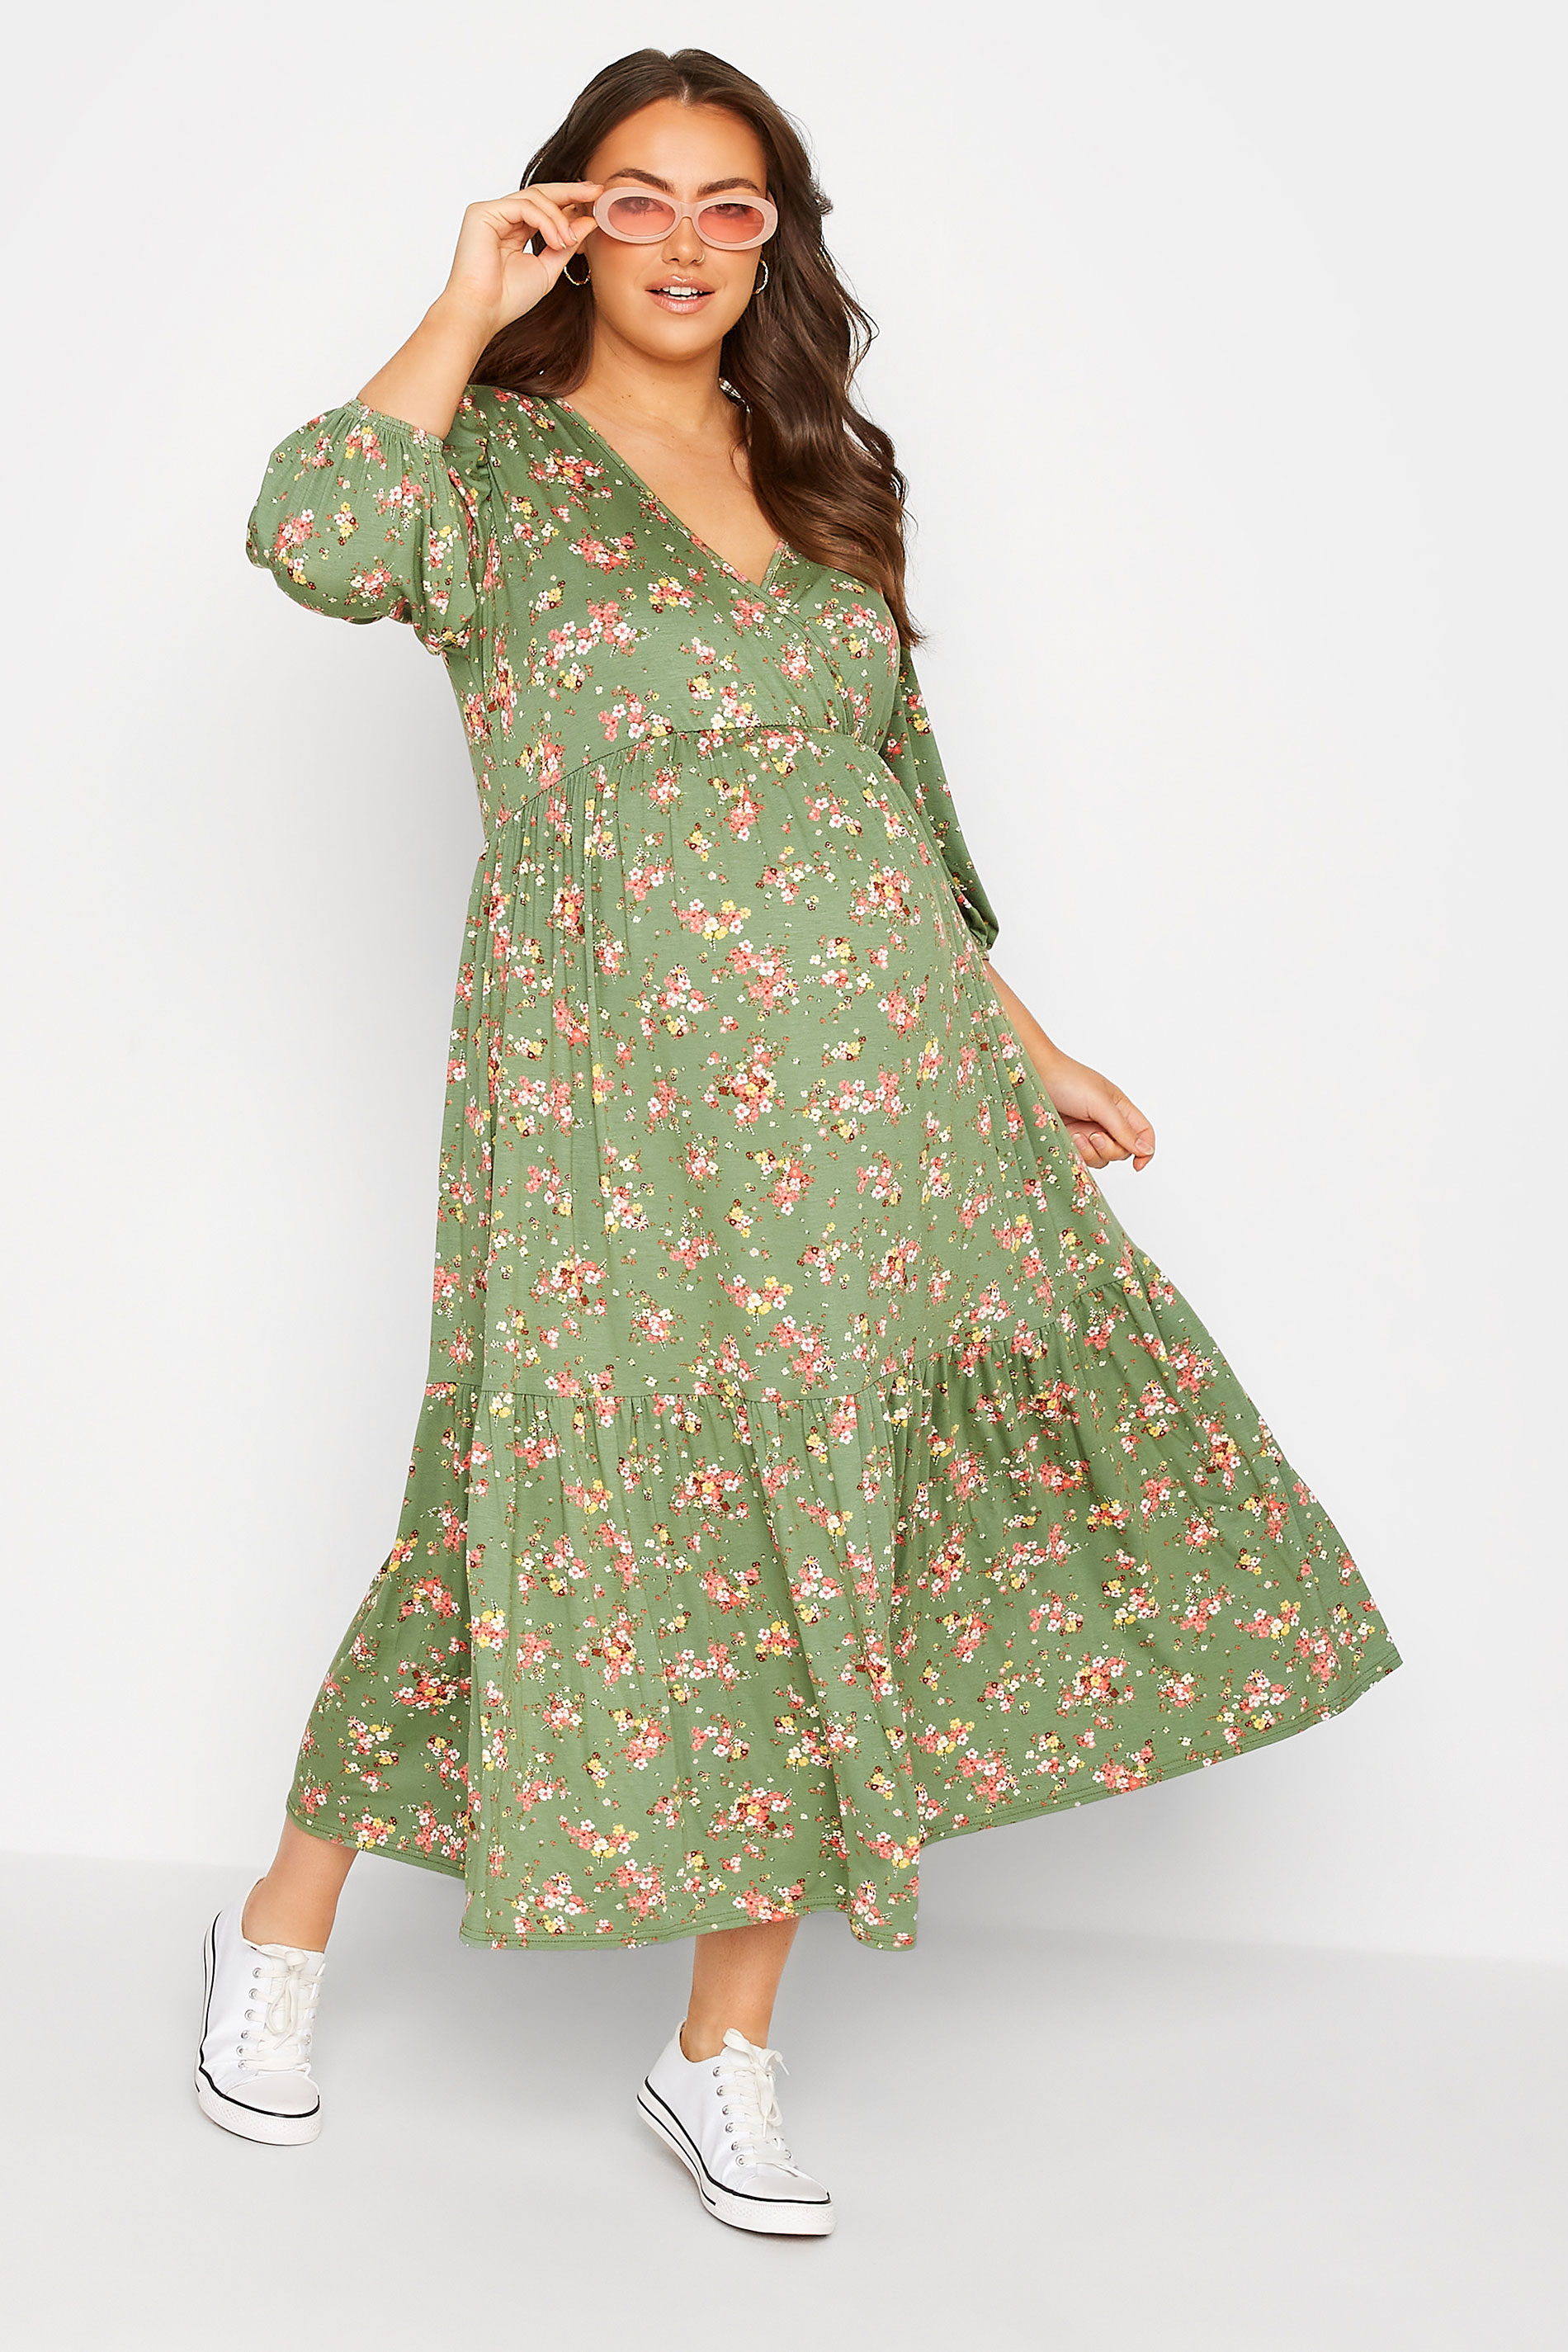 BUMP IT UP MATERNITY Curve Green Floral Print Tiered Wrap Dress 1